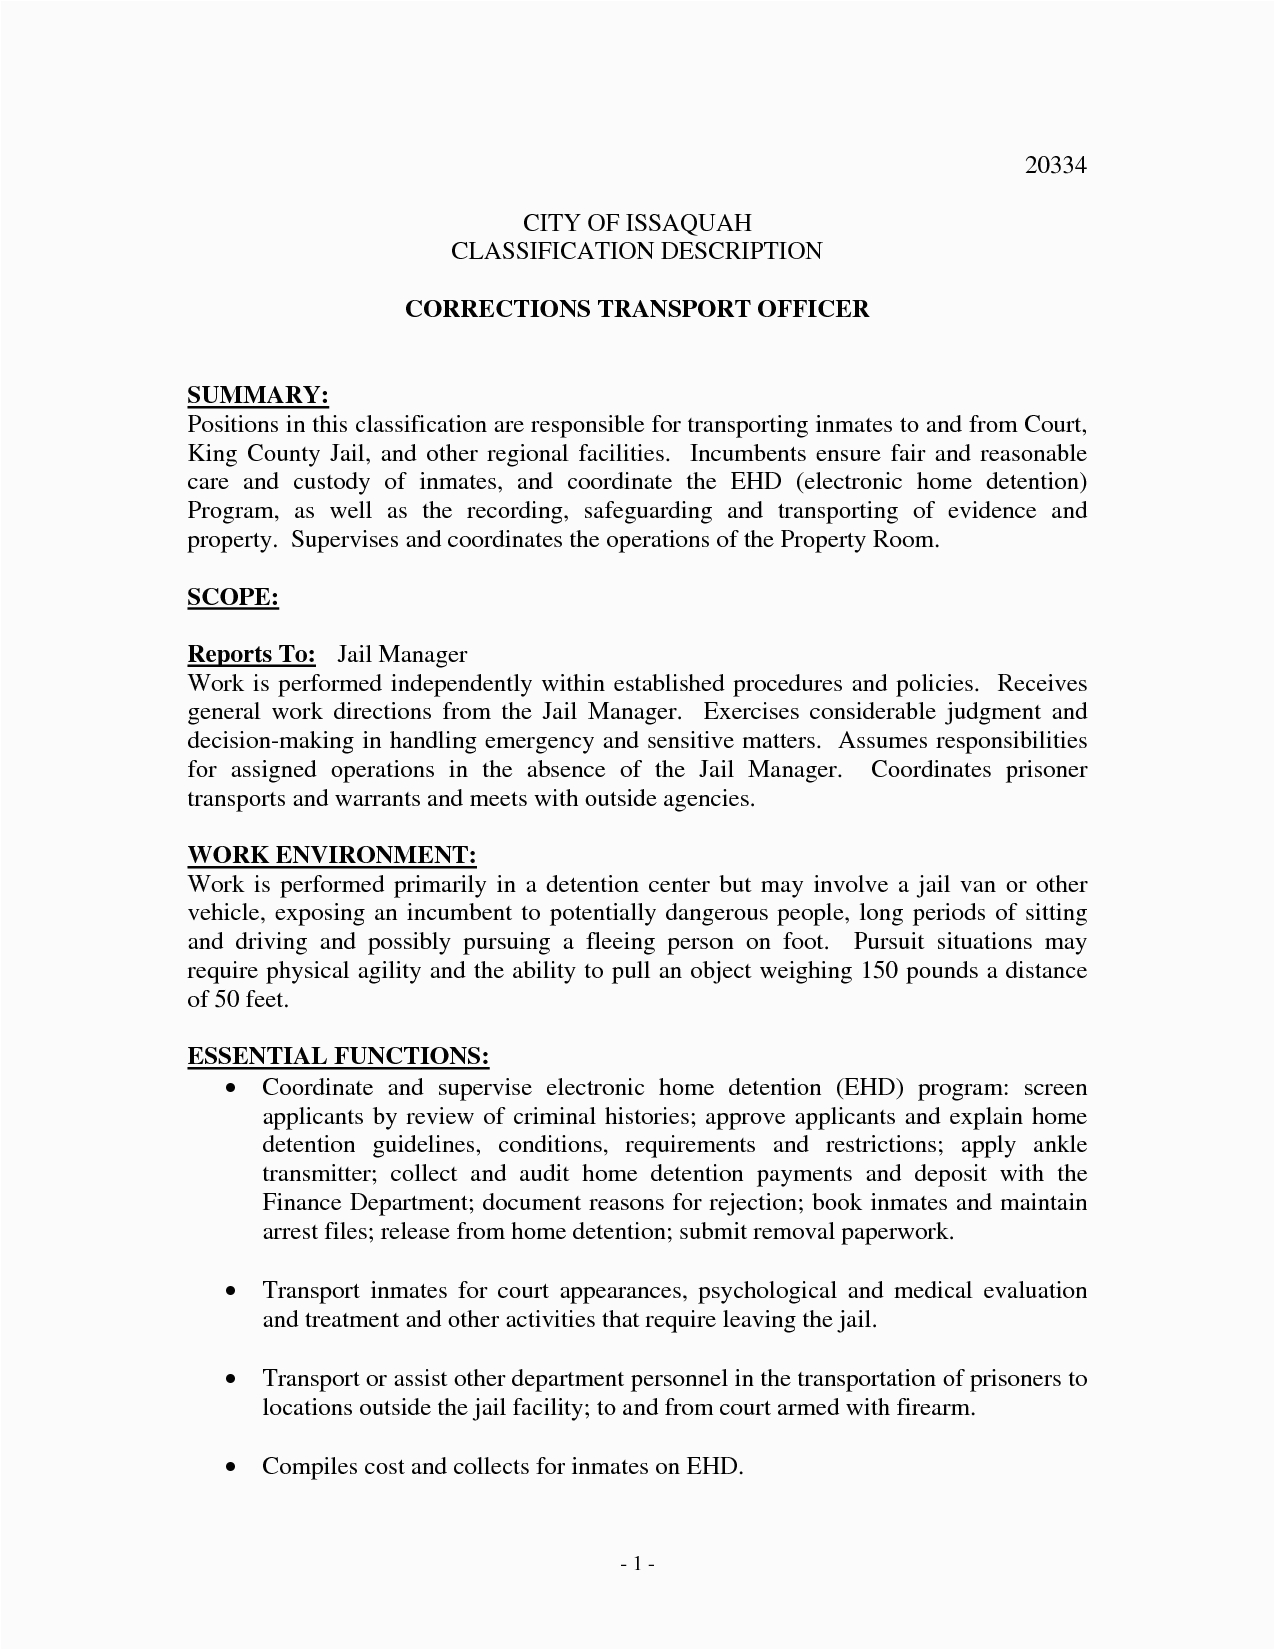 Correctional Officer Resume Samples No Experience Correctional Ficer Resume No Experience